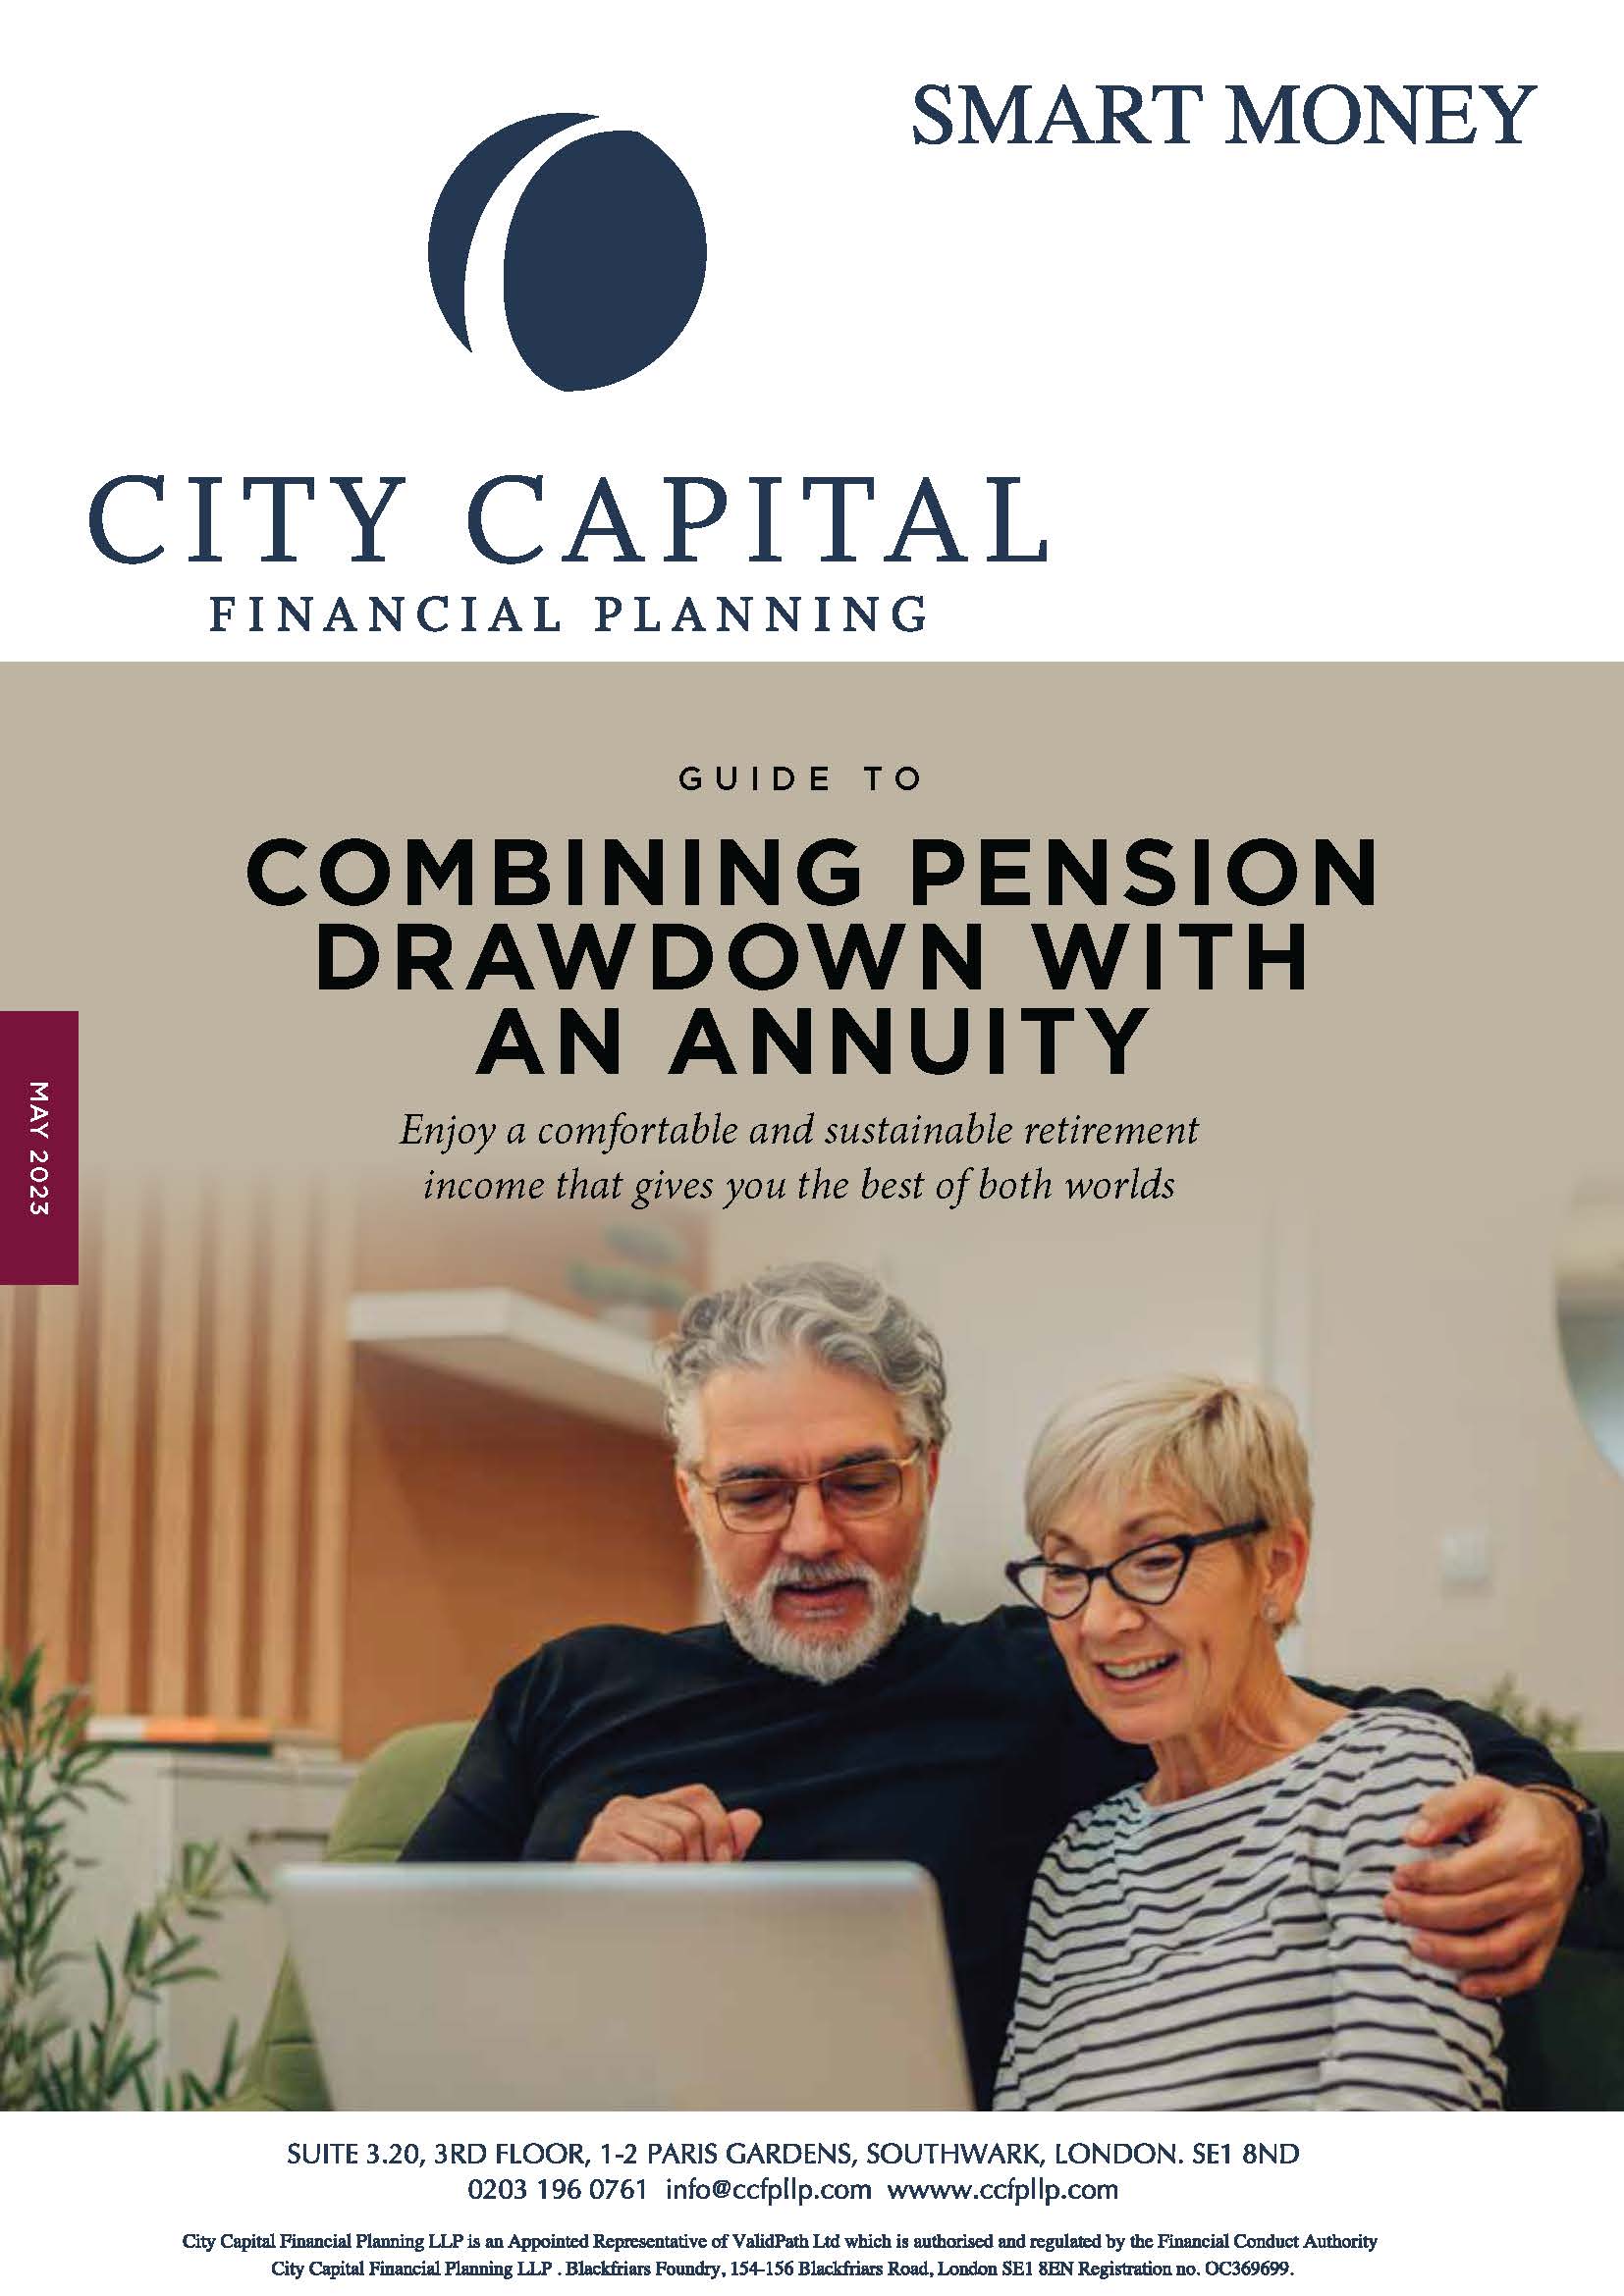 Guide to Combining Pension Drawdown with an Annuity